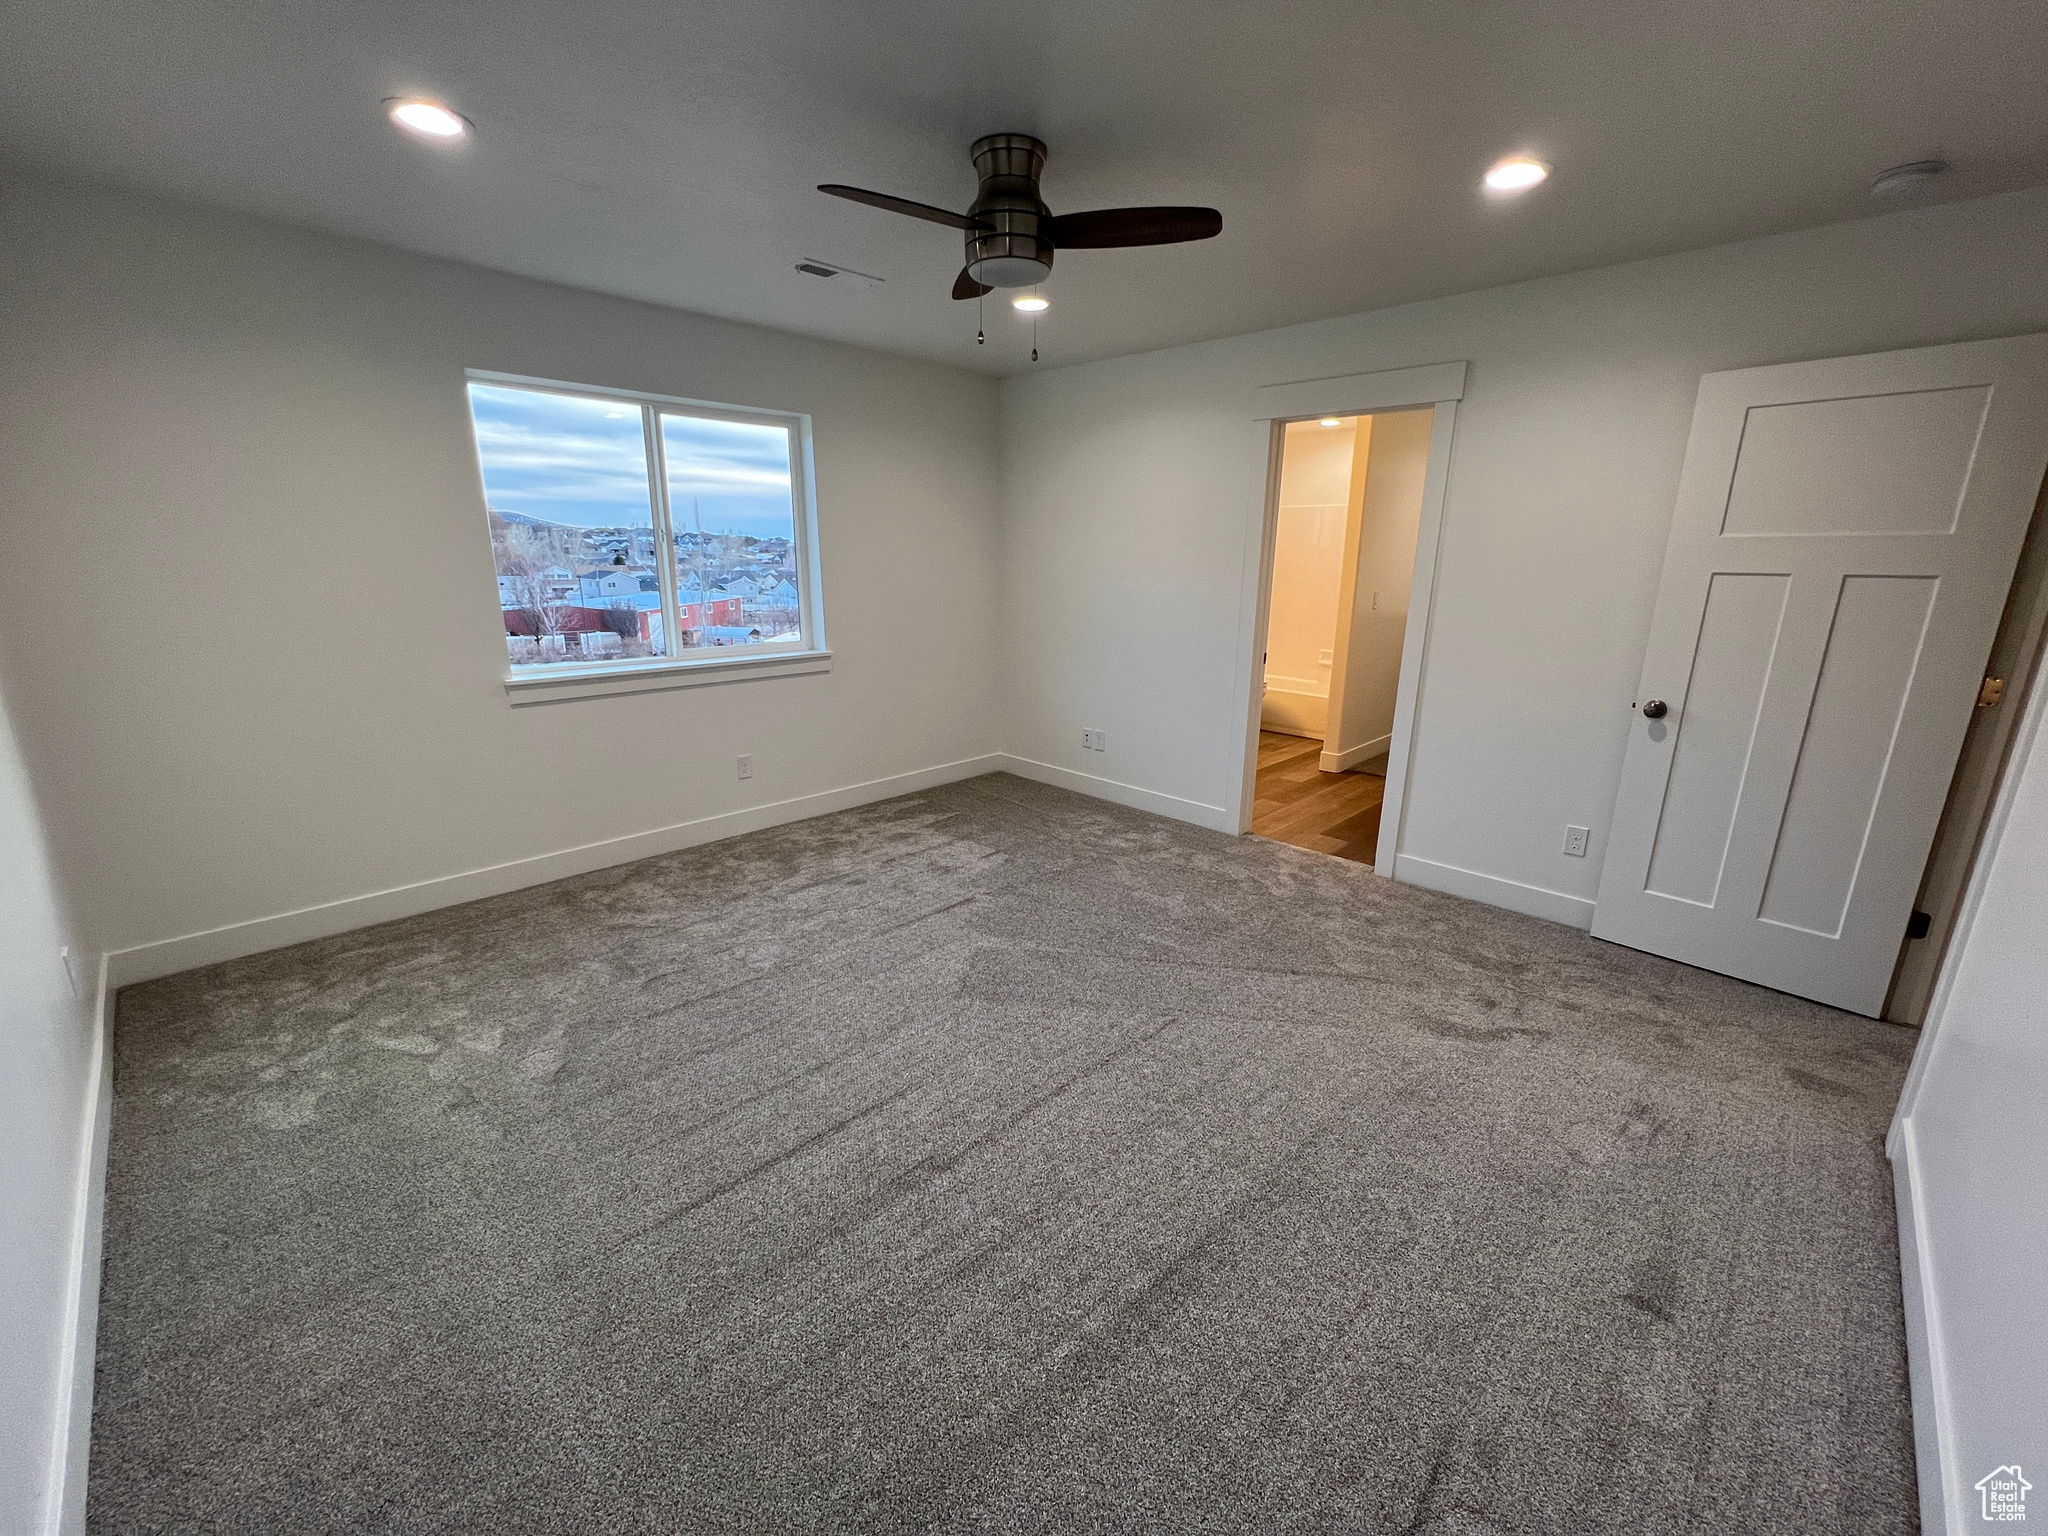 Master bedroom featuring connected bathroom, ceiling fan, and light colored carpet